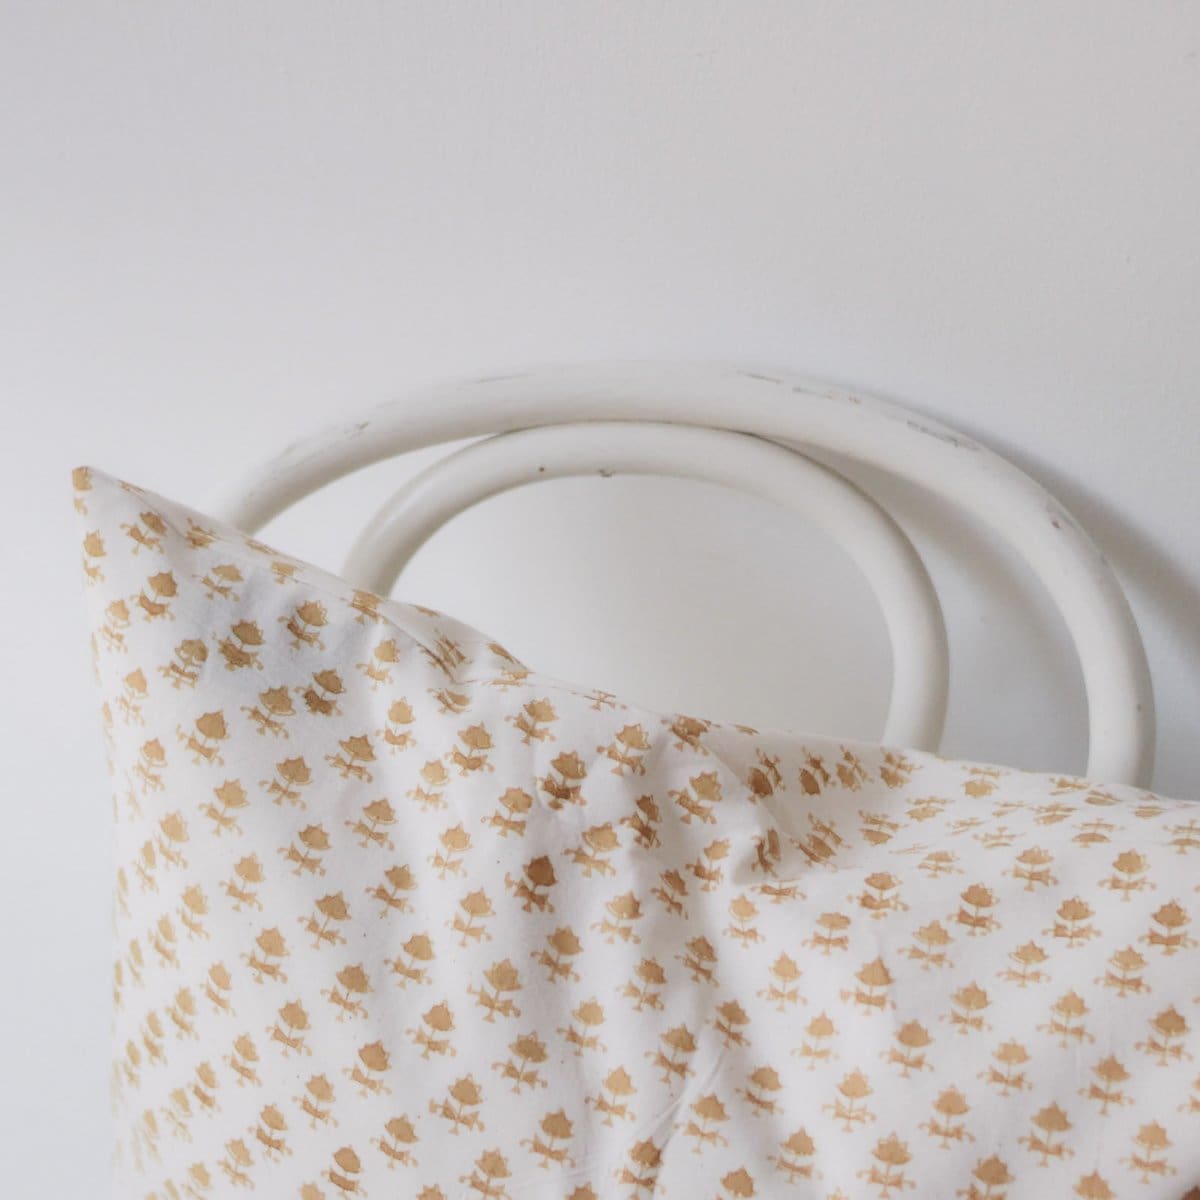 Hand Block Printed Pillow Cover - Textiles